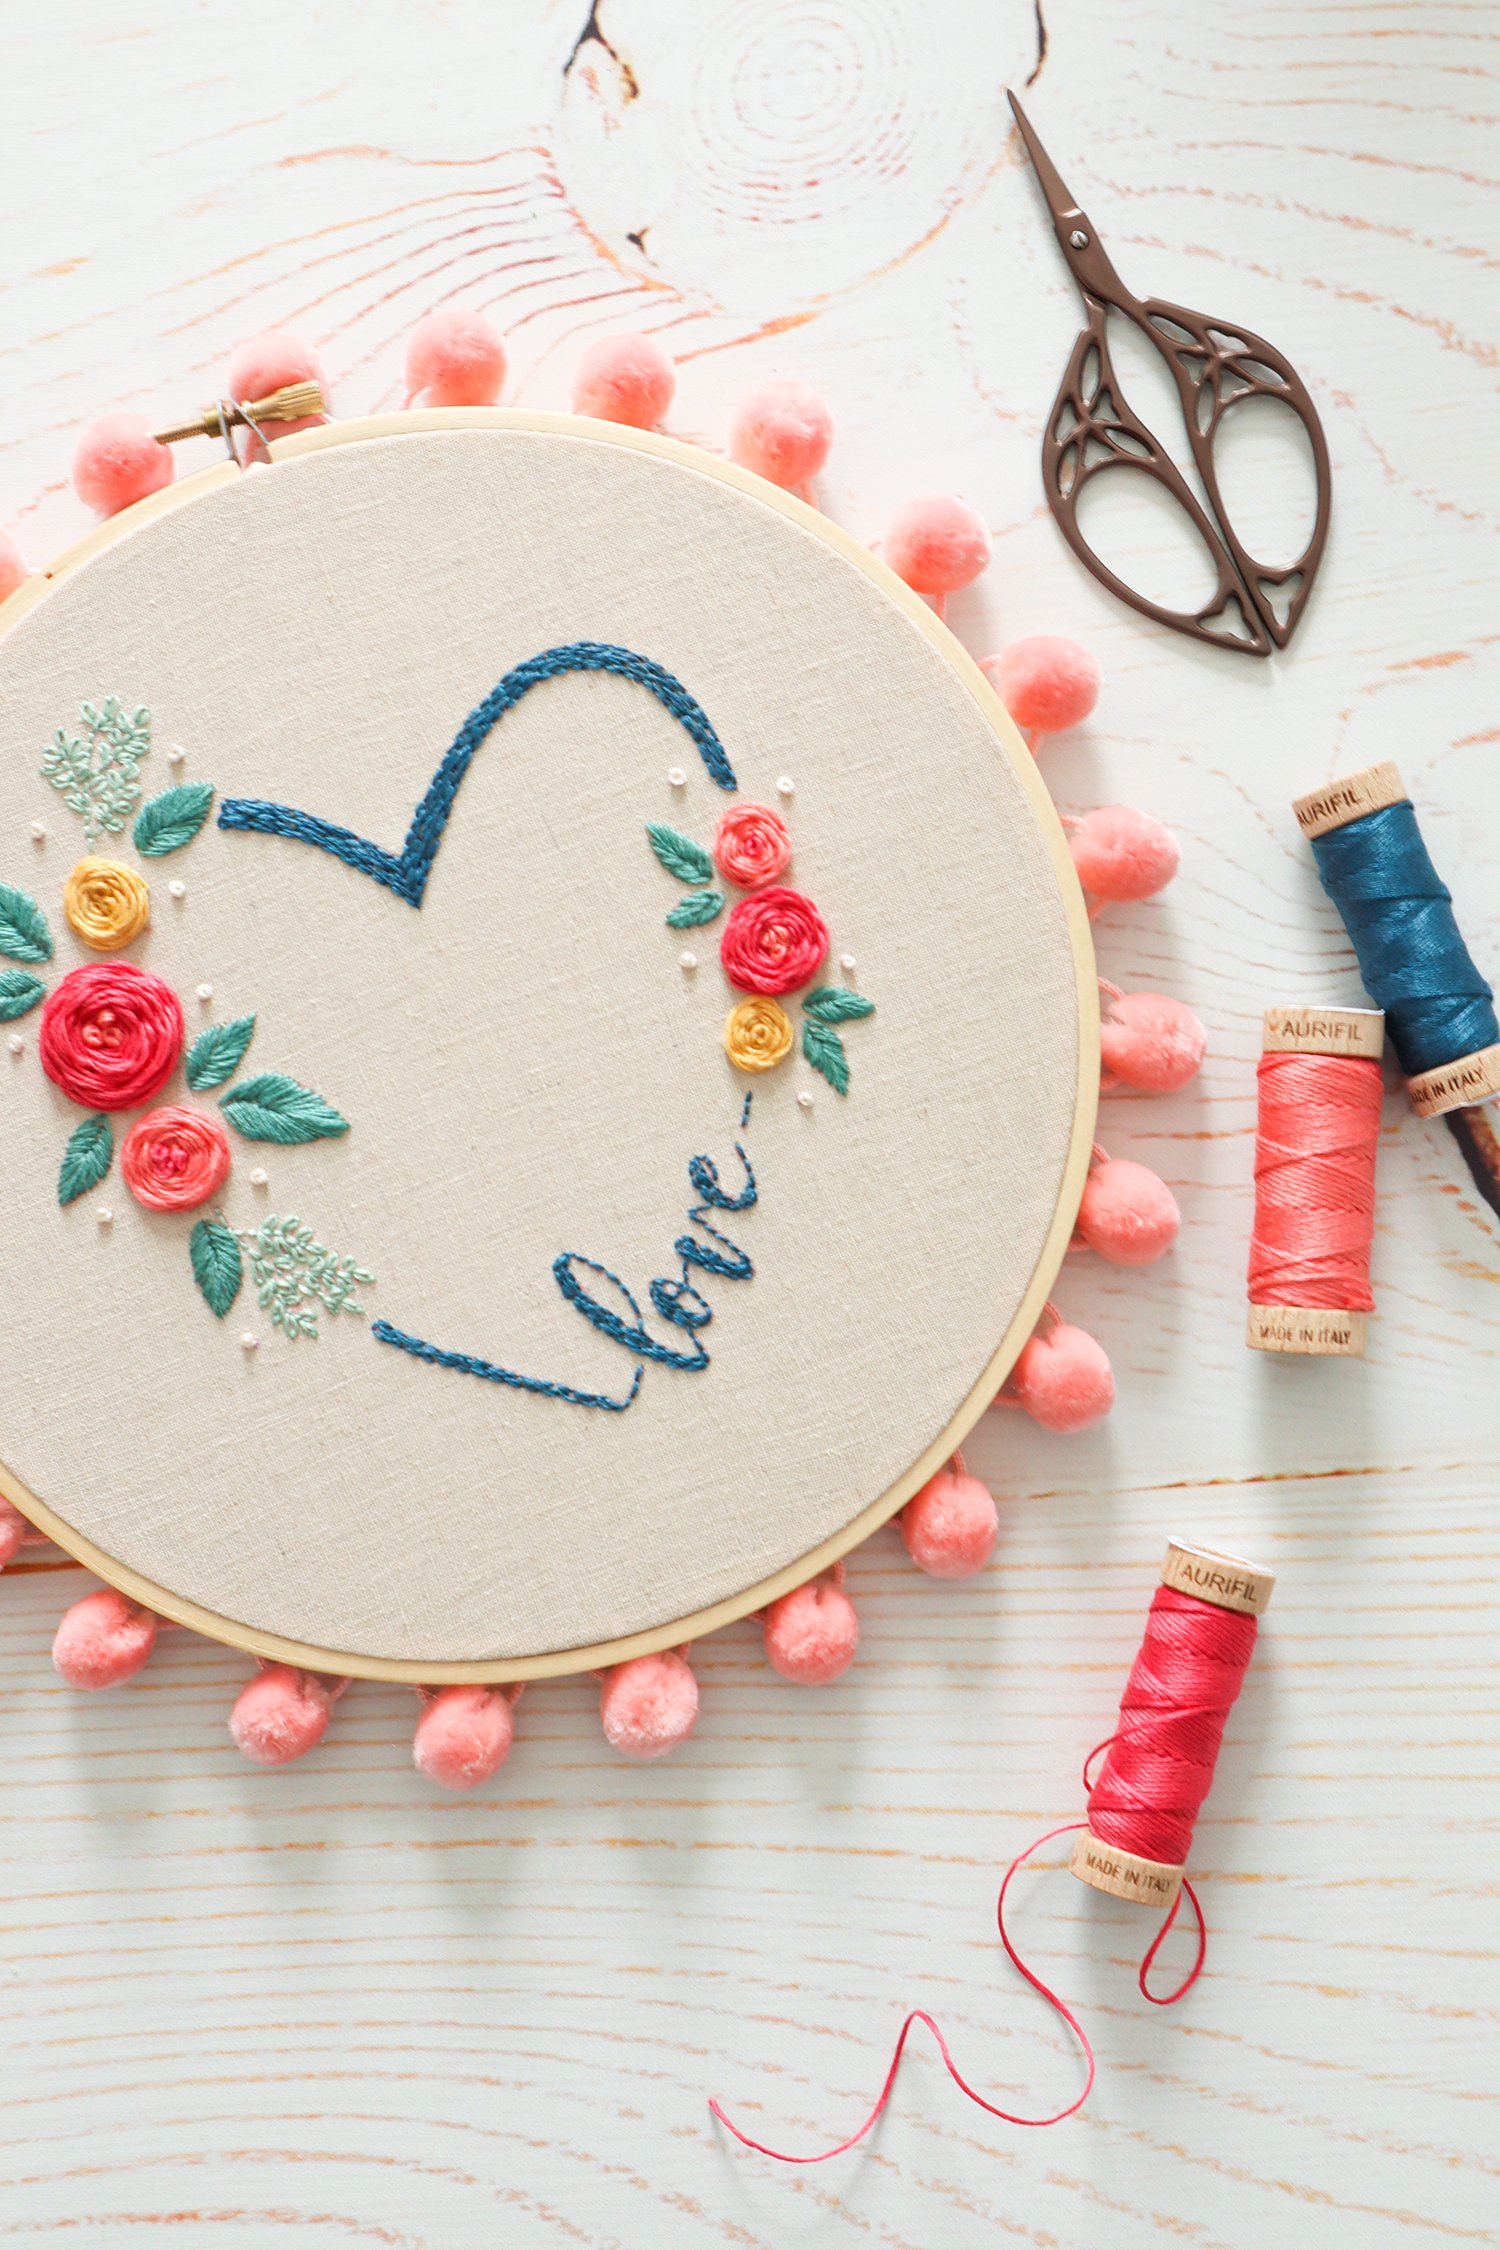 9 Free Valentine’s Day Hand Embroidery Patterns